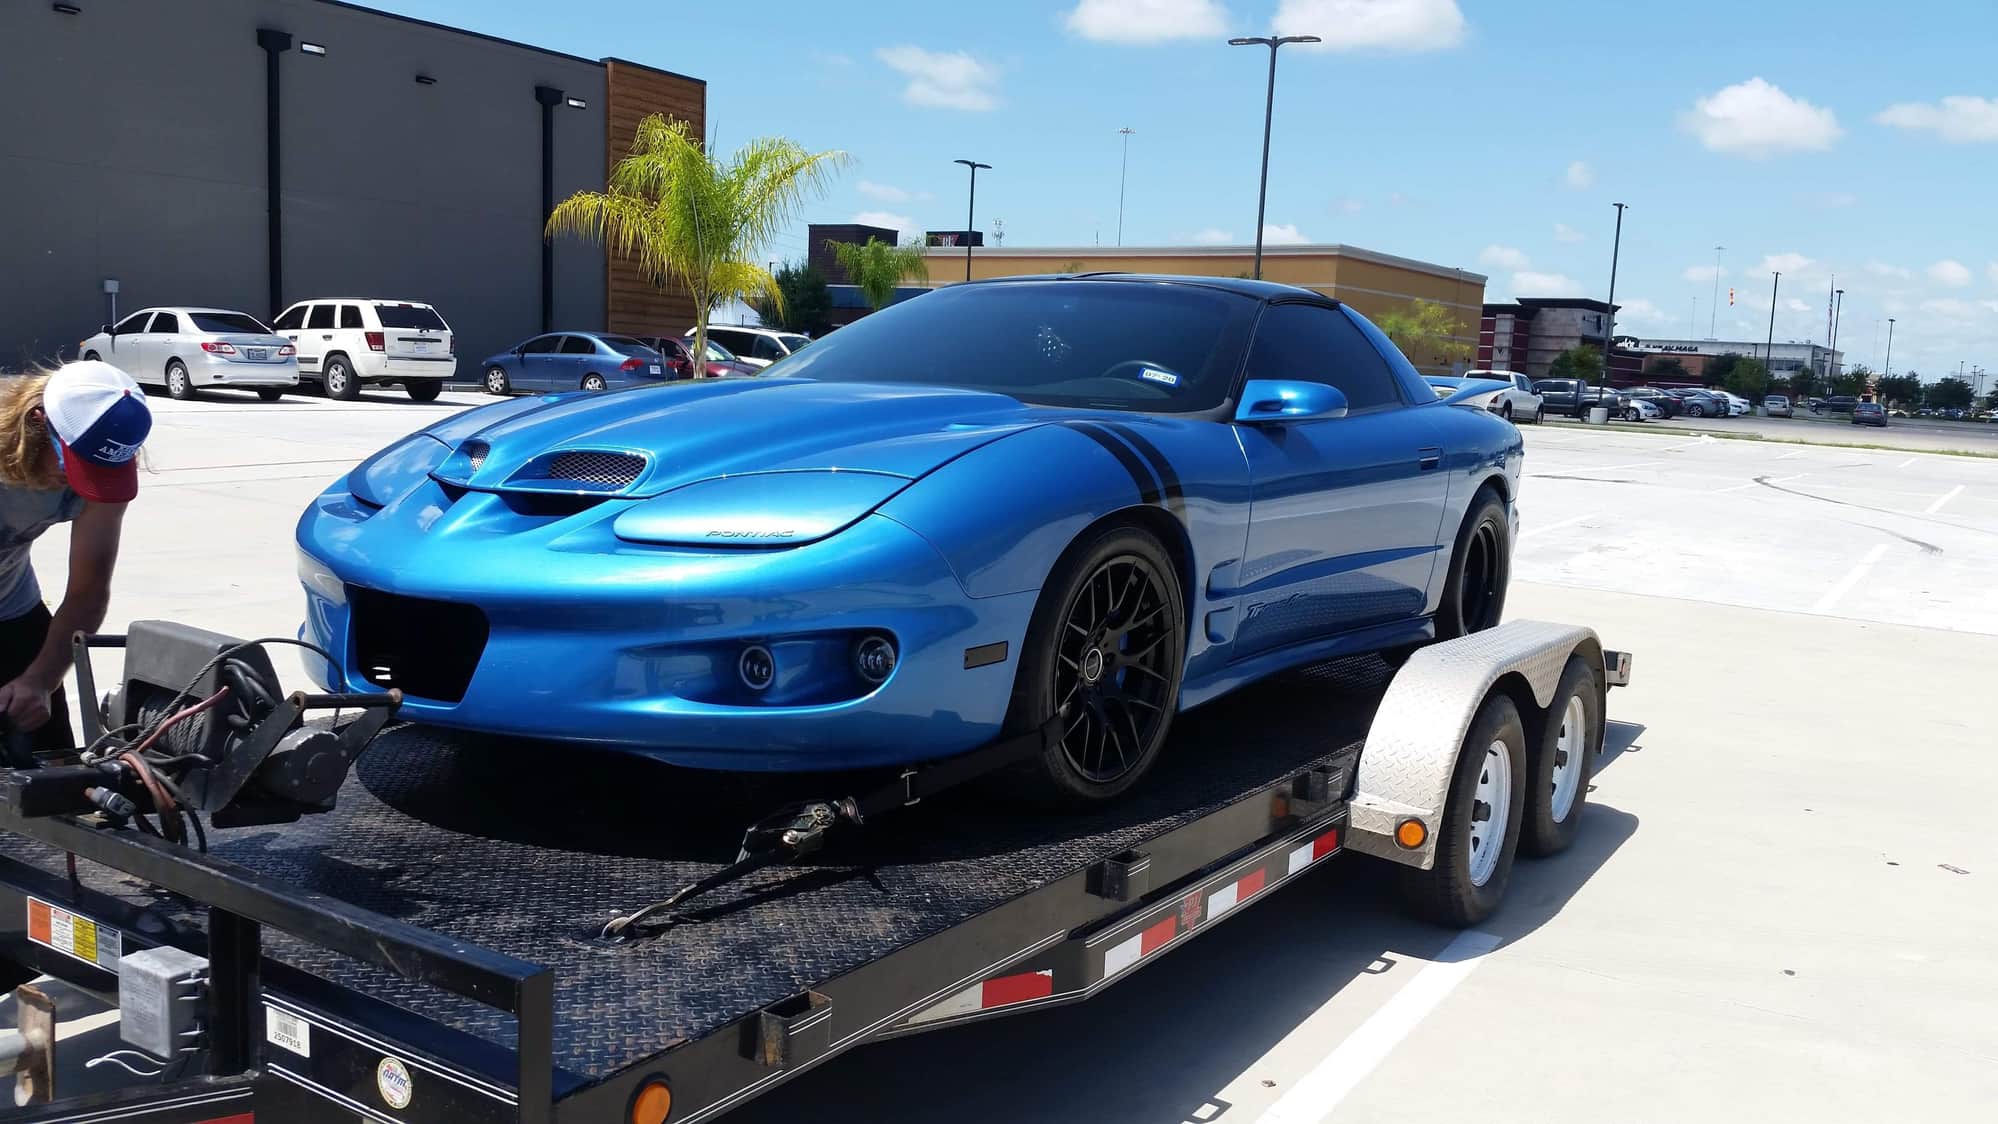 1999 Pontiac Firebird - 99' MBM Twin Turbo 800+WHP M6 Trans Am 1 of 157 Made 75000 Miles - Used - VIN 2G2FV22G3X2231506 - 75,000 Miles - 8 cyl - 2WD - Manual - Coupe - Blue - Columbus, TX 78934, United States